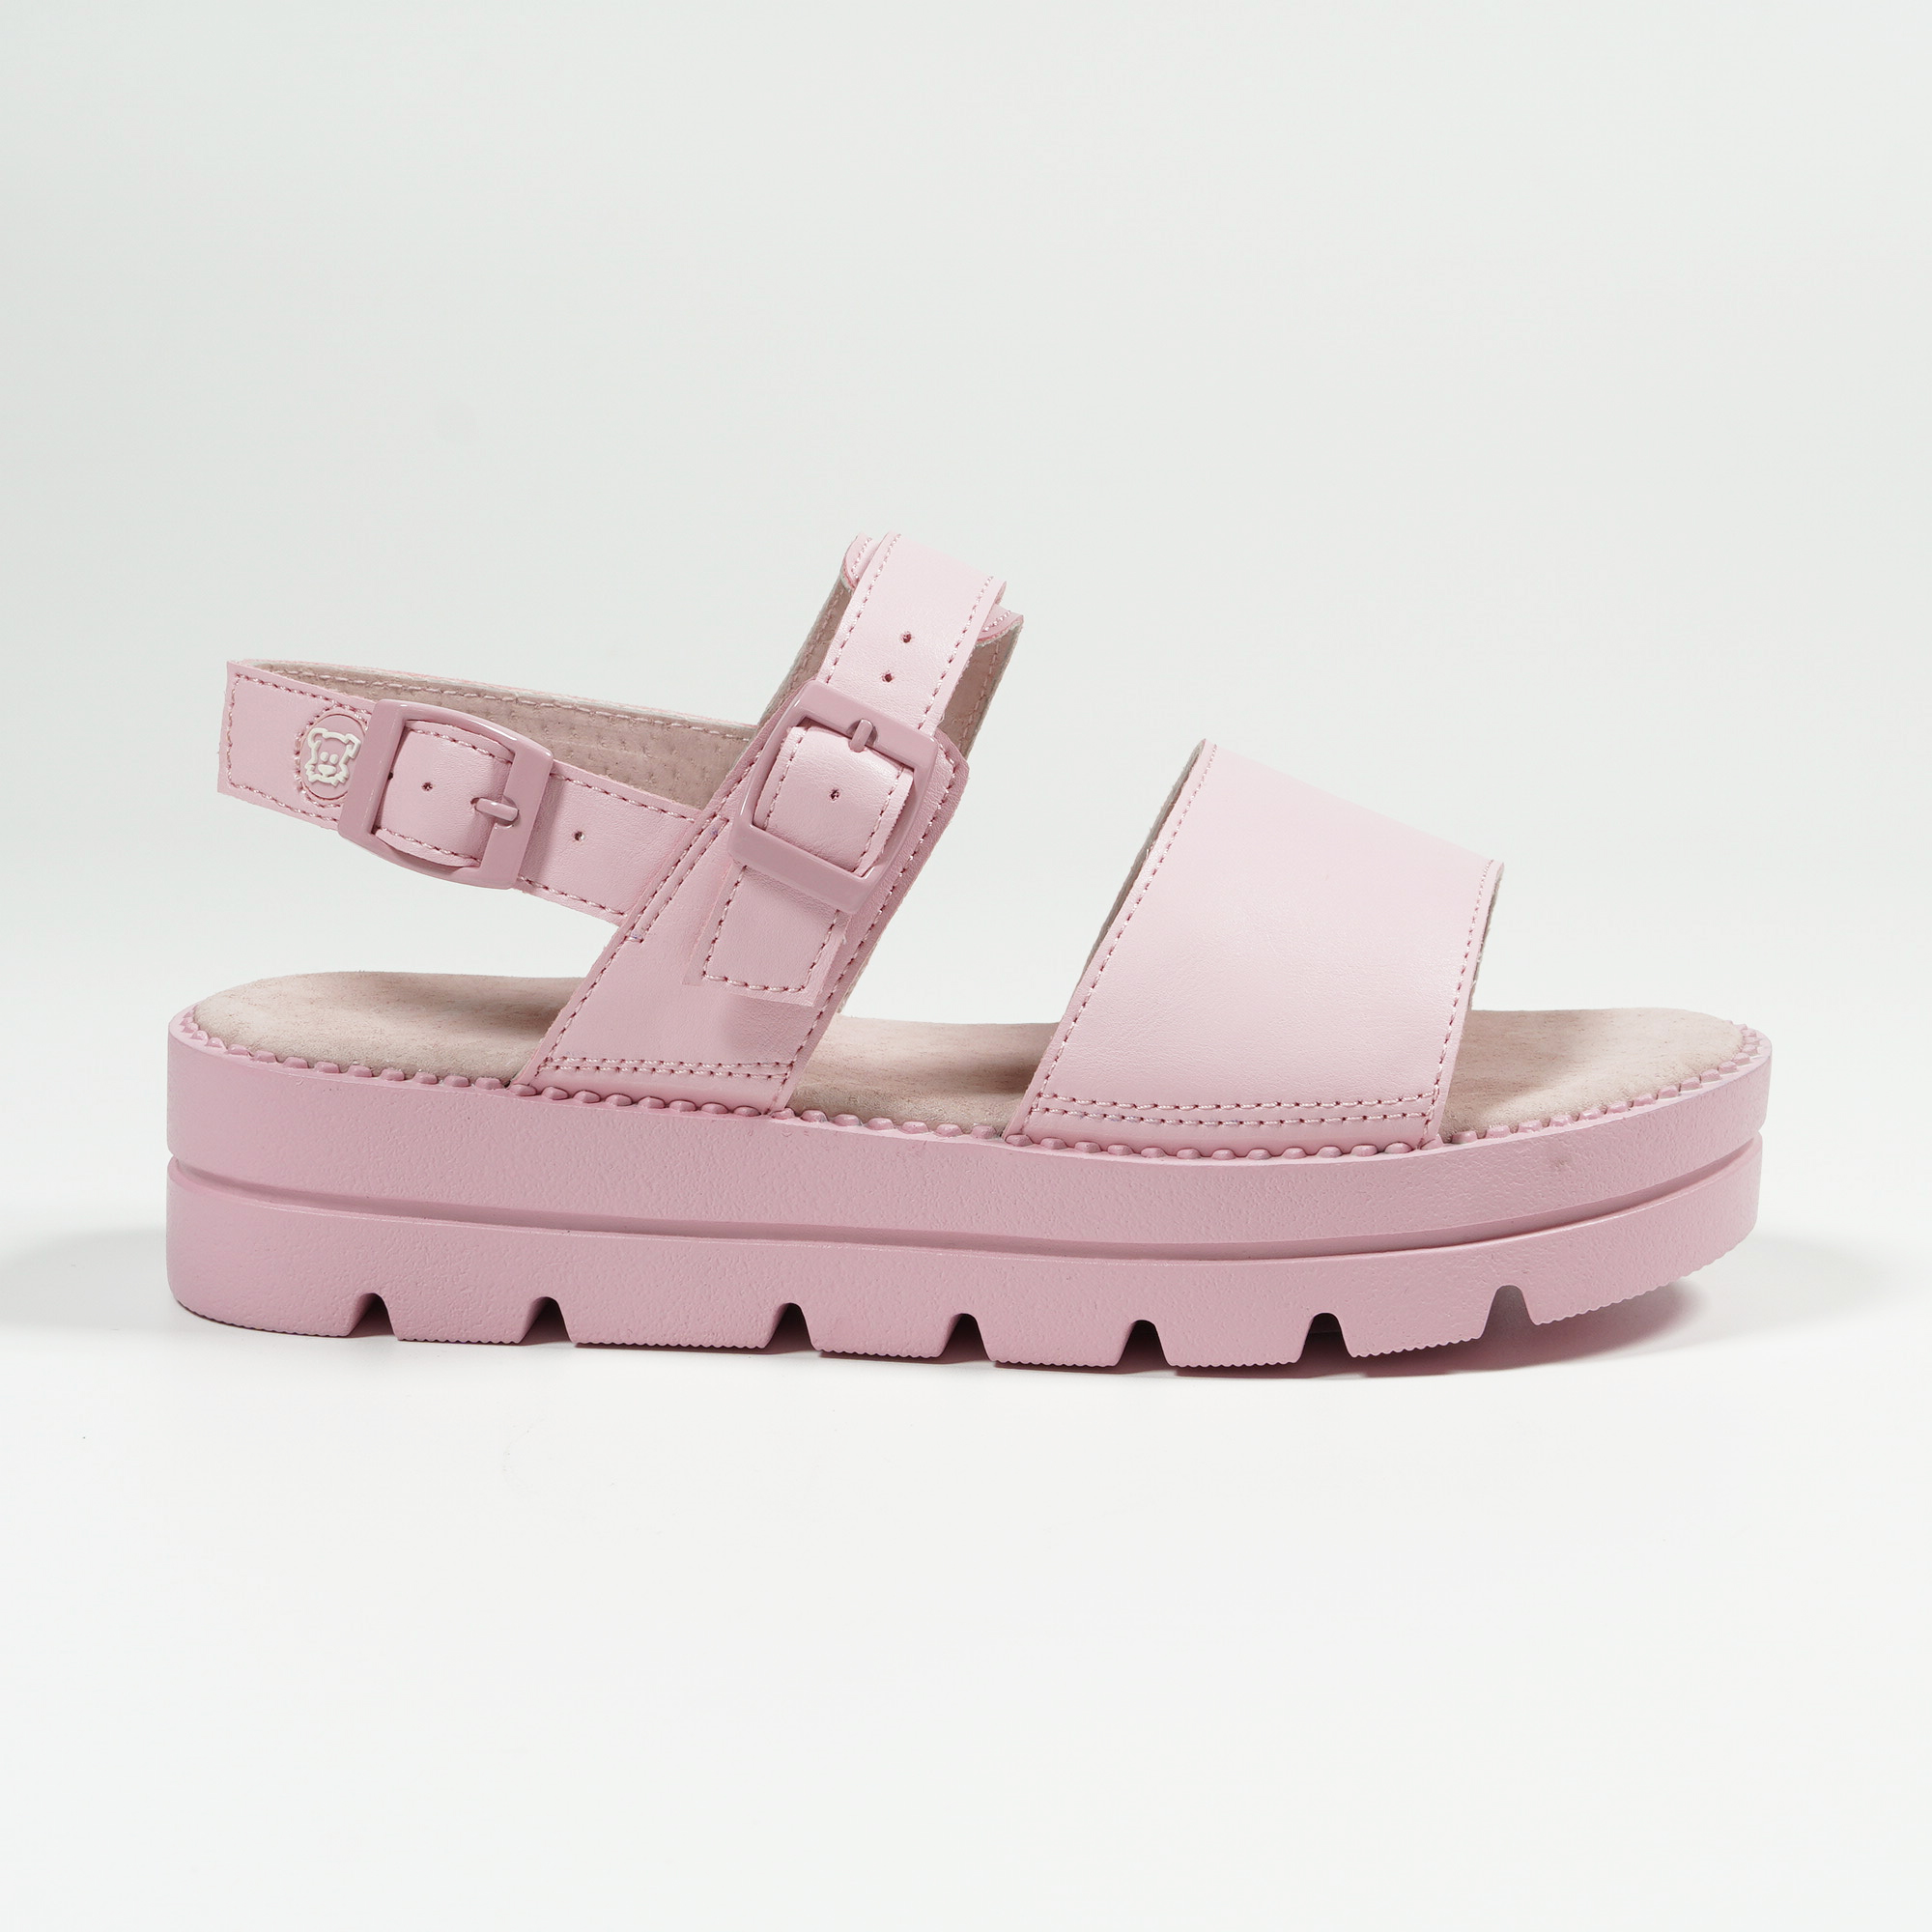 China Summer New Fashion Girls Platform Sandals In Ice Cream Color